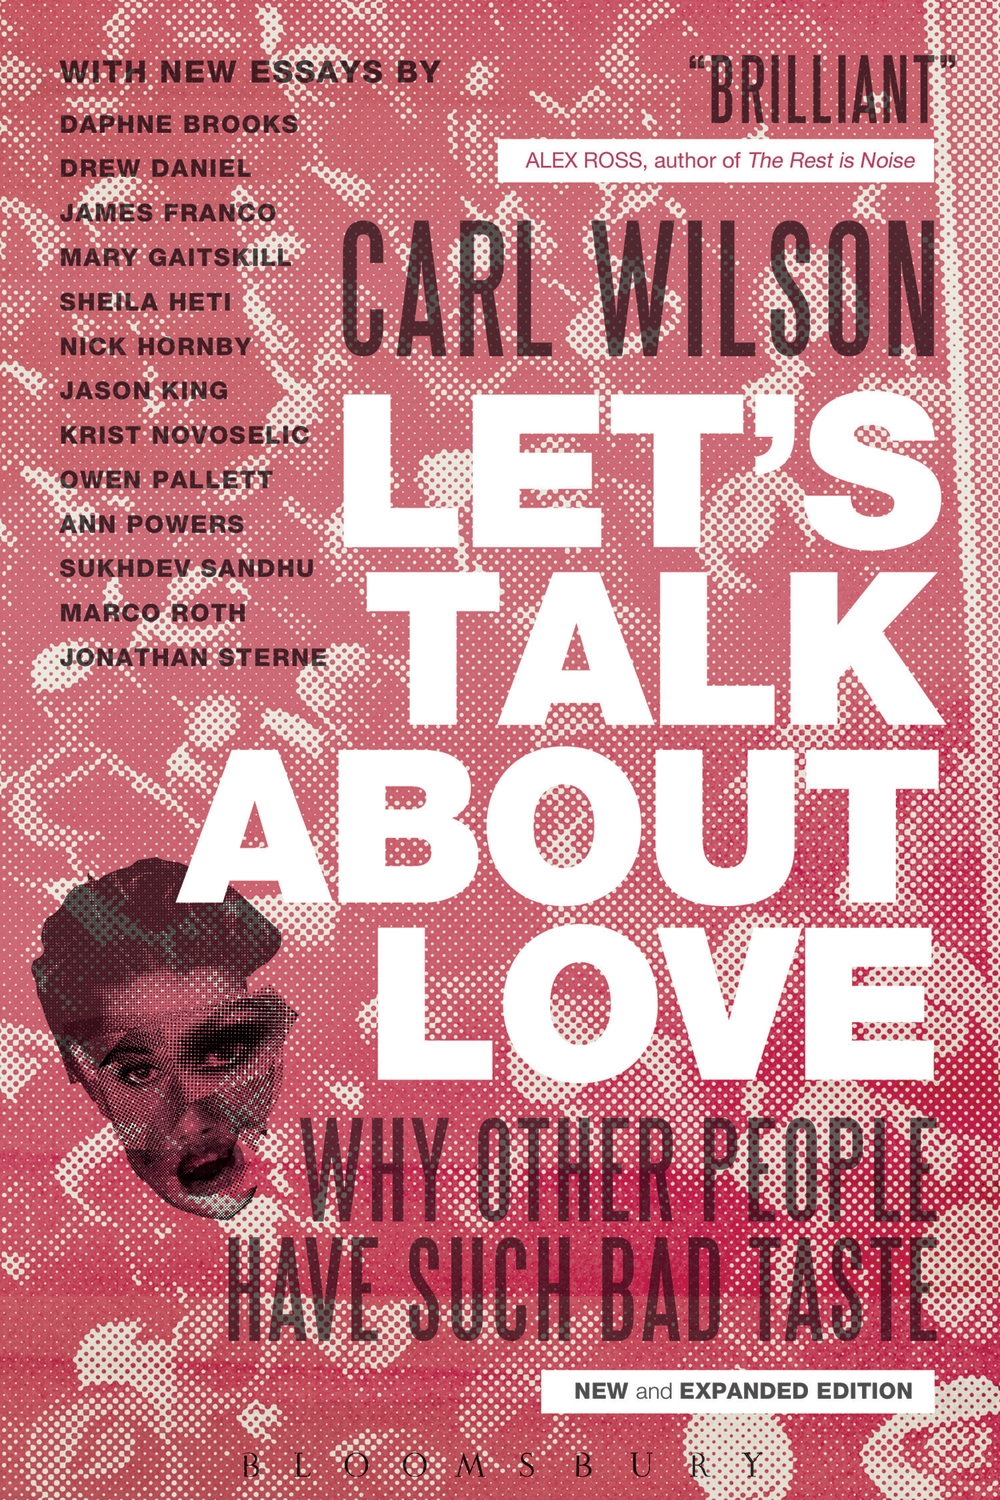 Book Review: <em>Let’s Talk About Love: Why Other People Have Such Bad Taste</em> by Carl Wilson